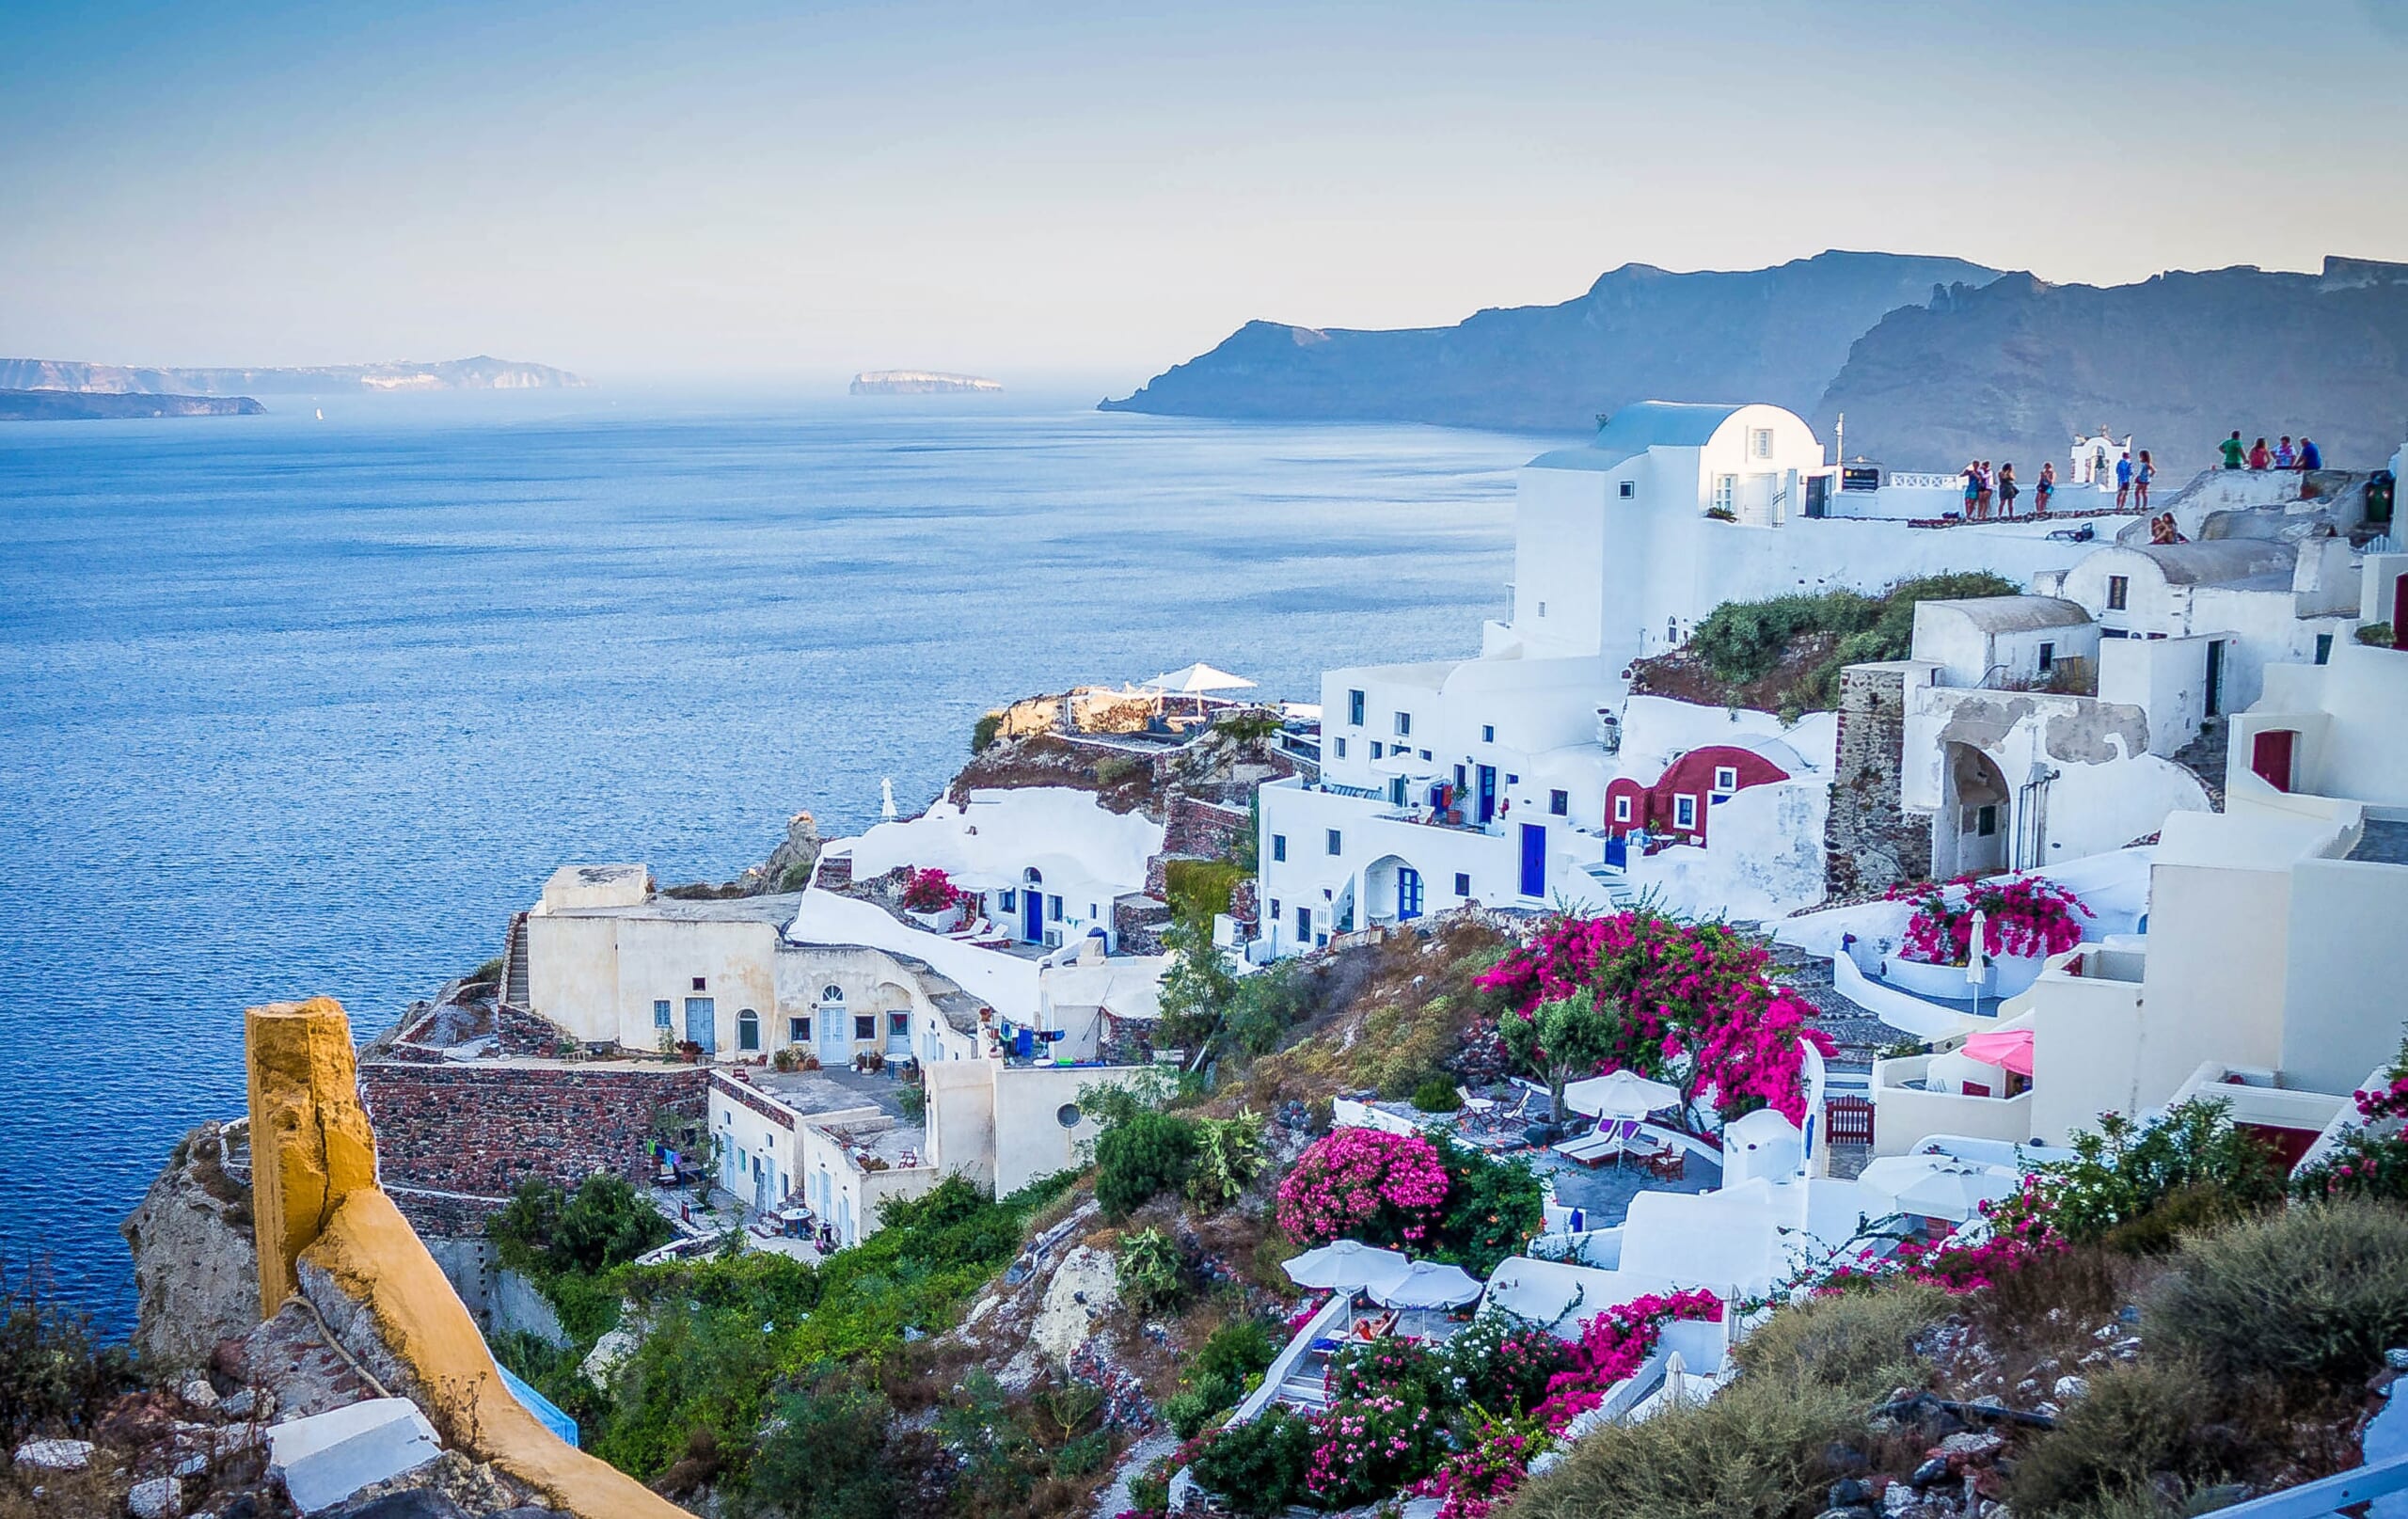 Greece, Santorini, Image by Michelle Raponi from Pixabay